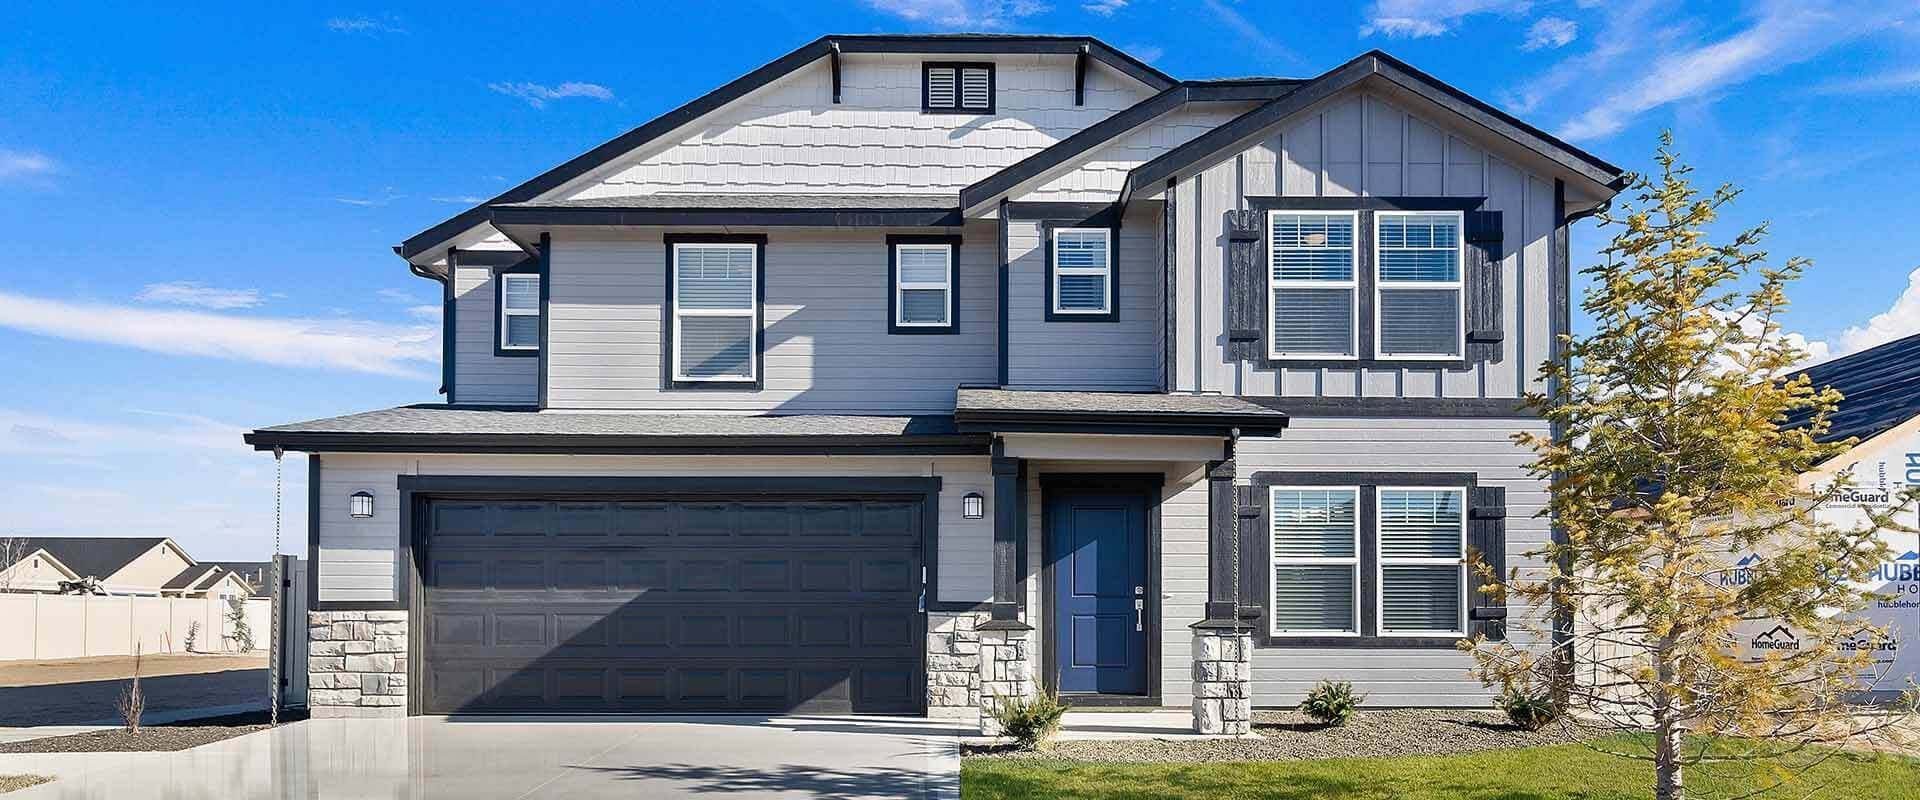 Spruce_Hubble_Homes_New_Homes_Boise_Front of Home.jpg